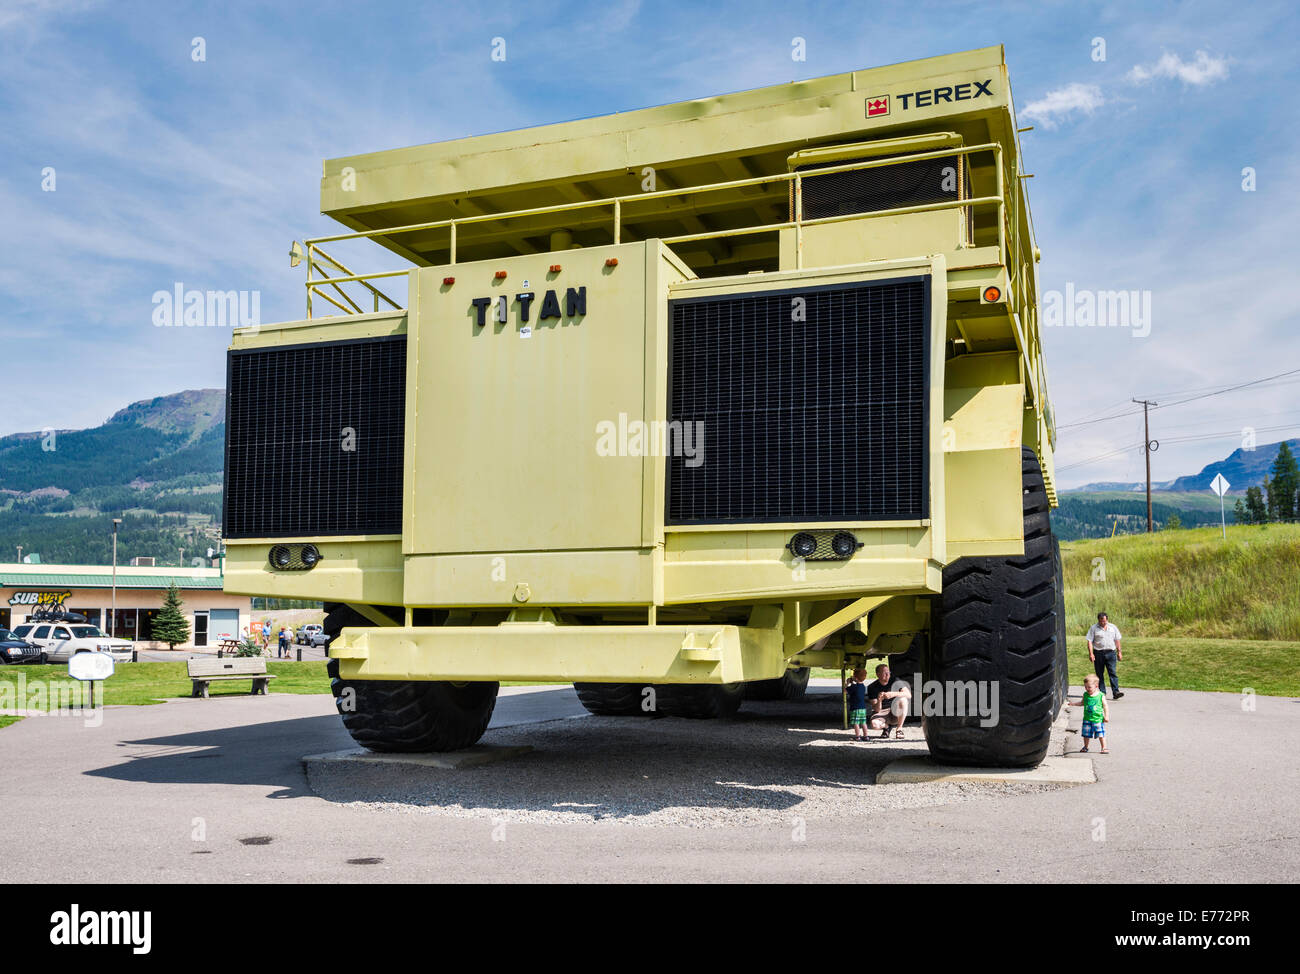 Terex Titan, haul truck for open pit mines, the largest truck in the world, on display in Sparwood, British Columbia, Canada Stock Photo